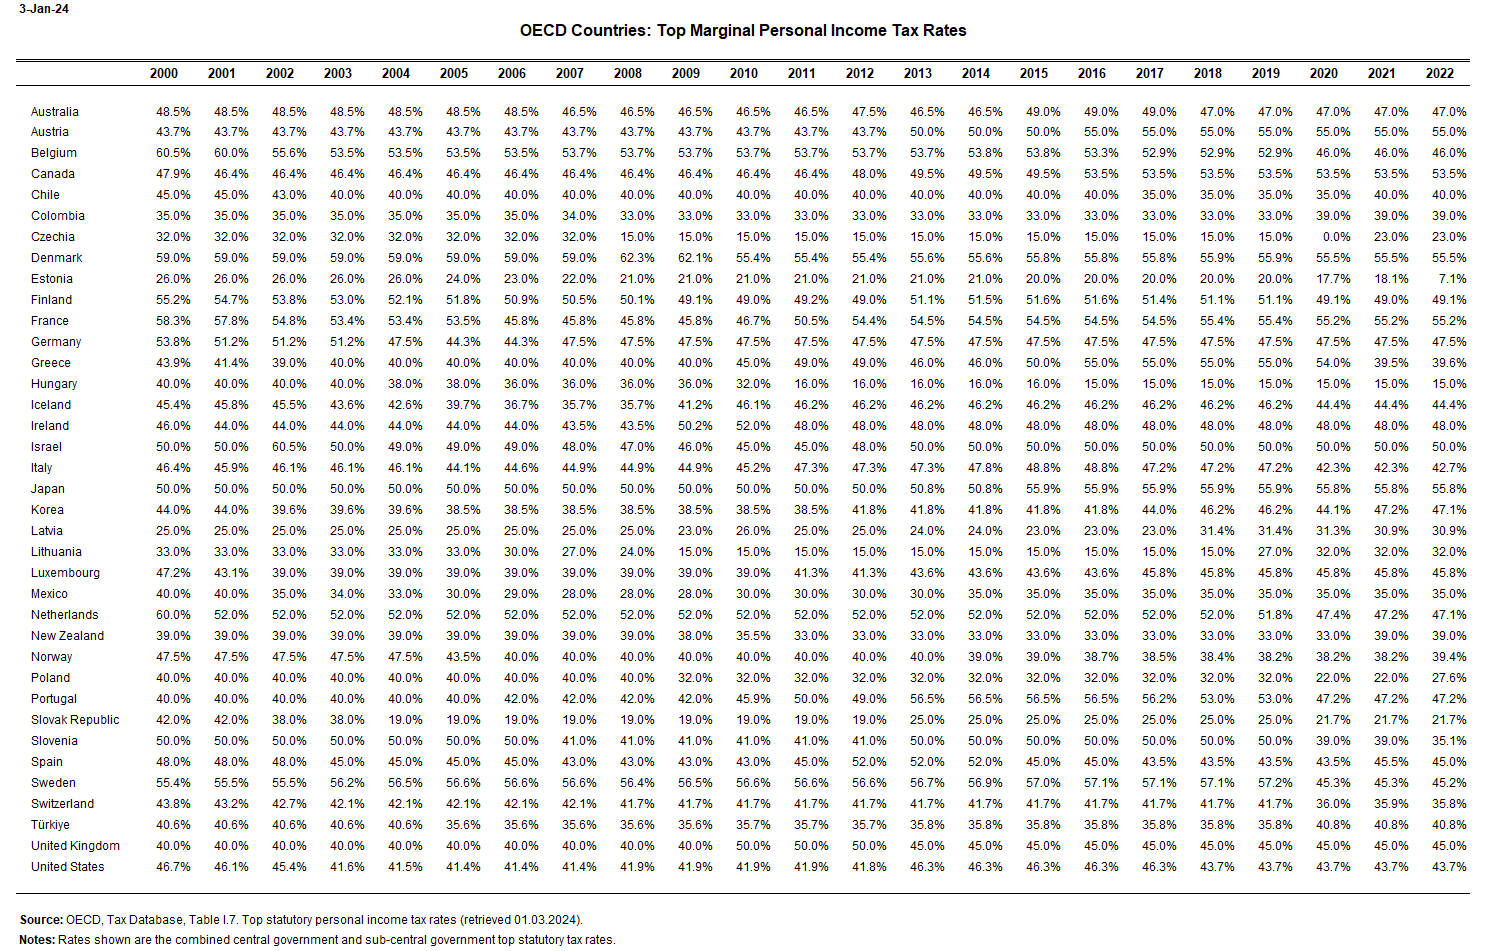 OECD Historical Top Marginal Personal Income Tax Rates